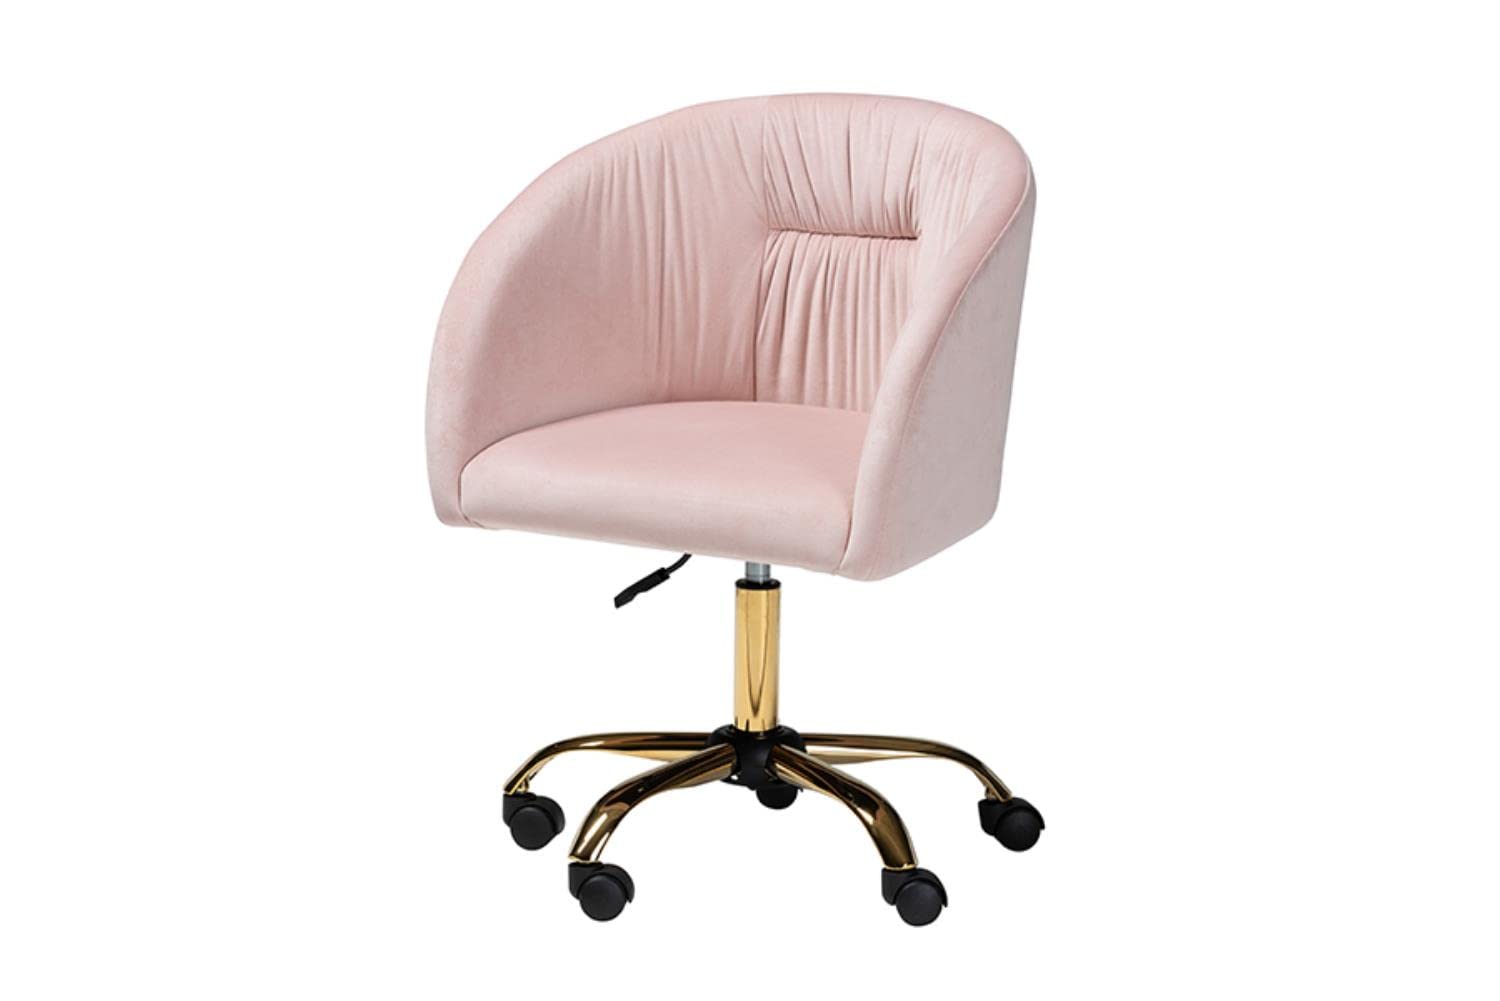 Baxton Studio Ravenna Contemporary Glam and Luxe Blush Pink Velvet Fabric and Gold Metal Swivel Office Chair